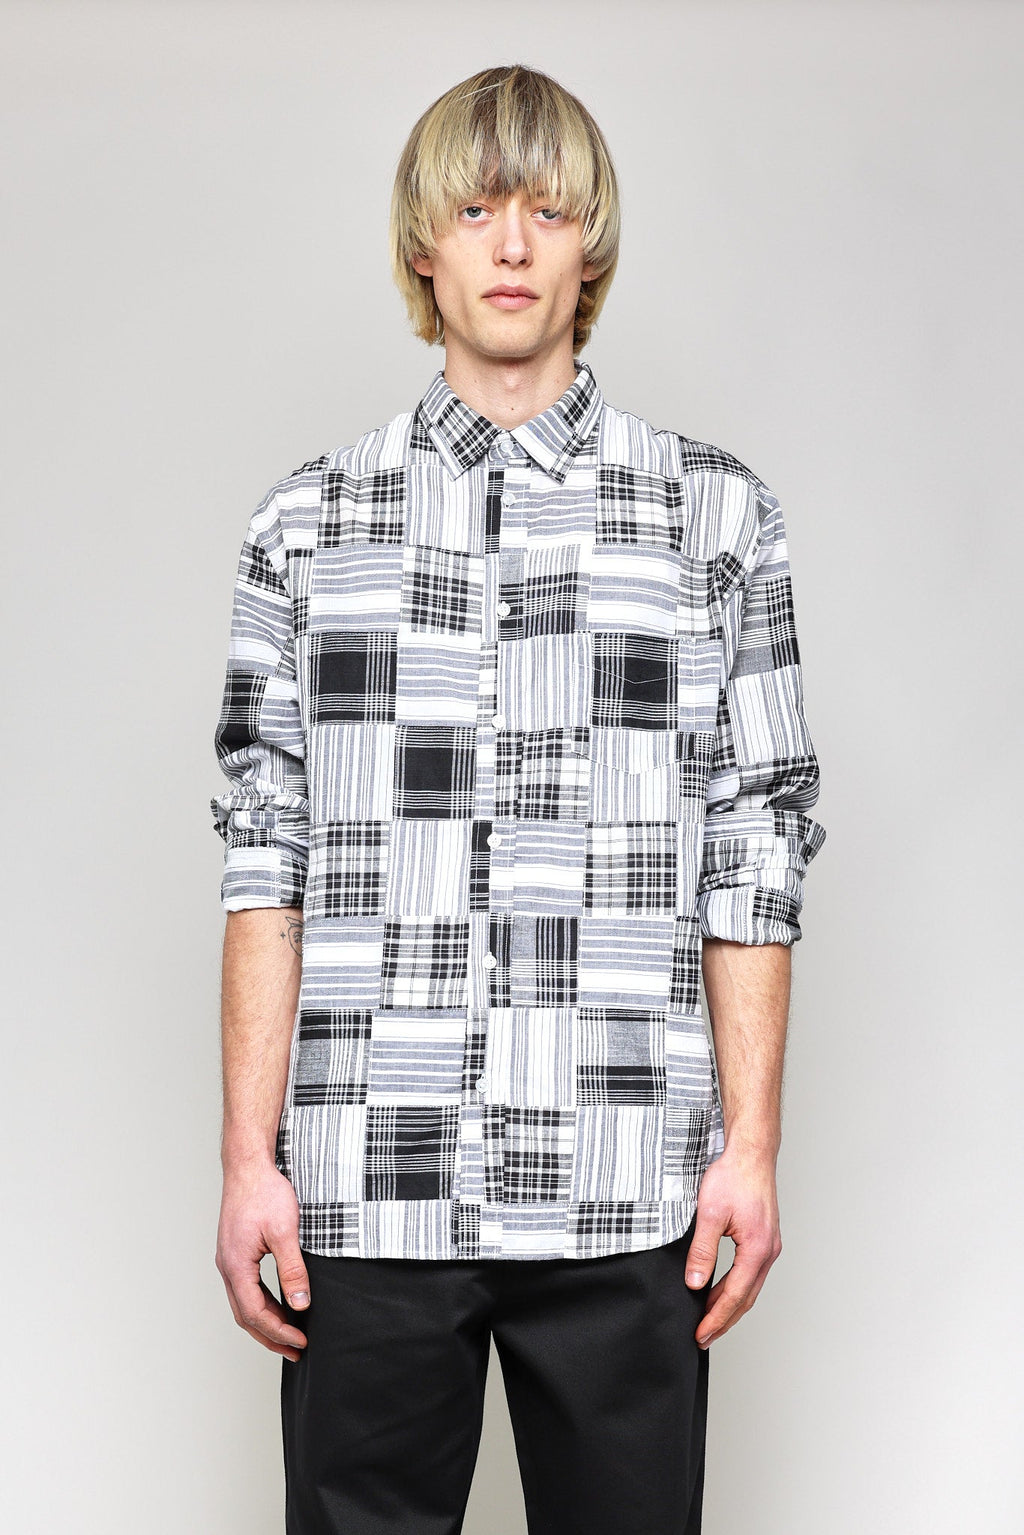 Japanese Patchwork Plaid in Black and White 02